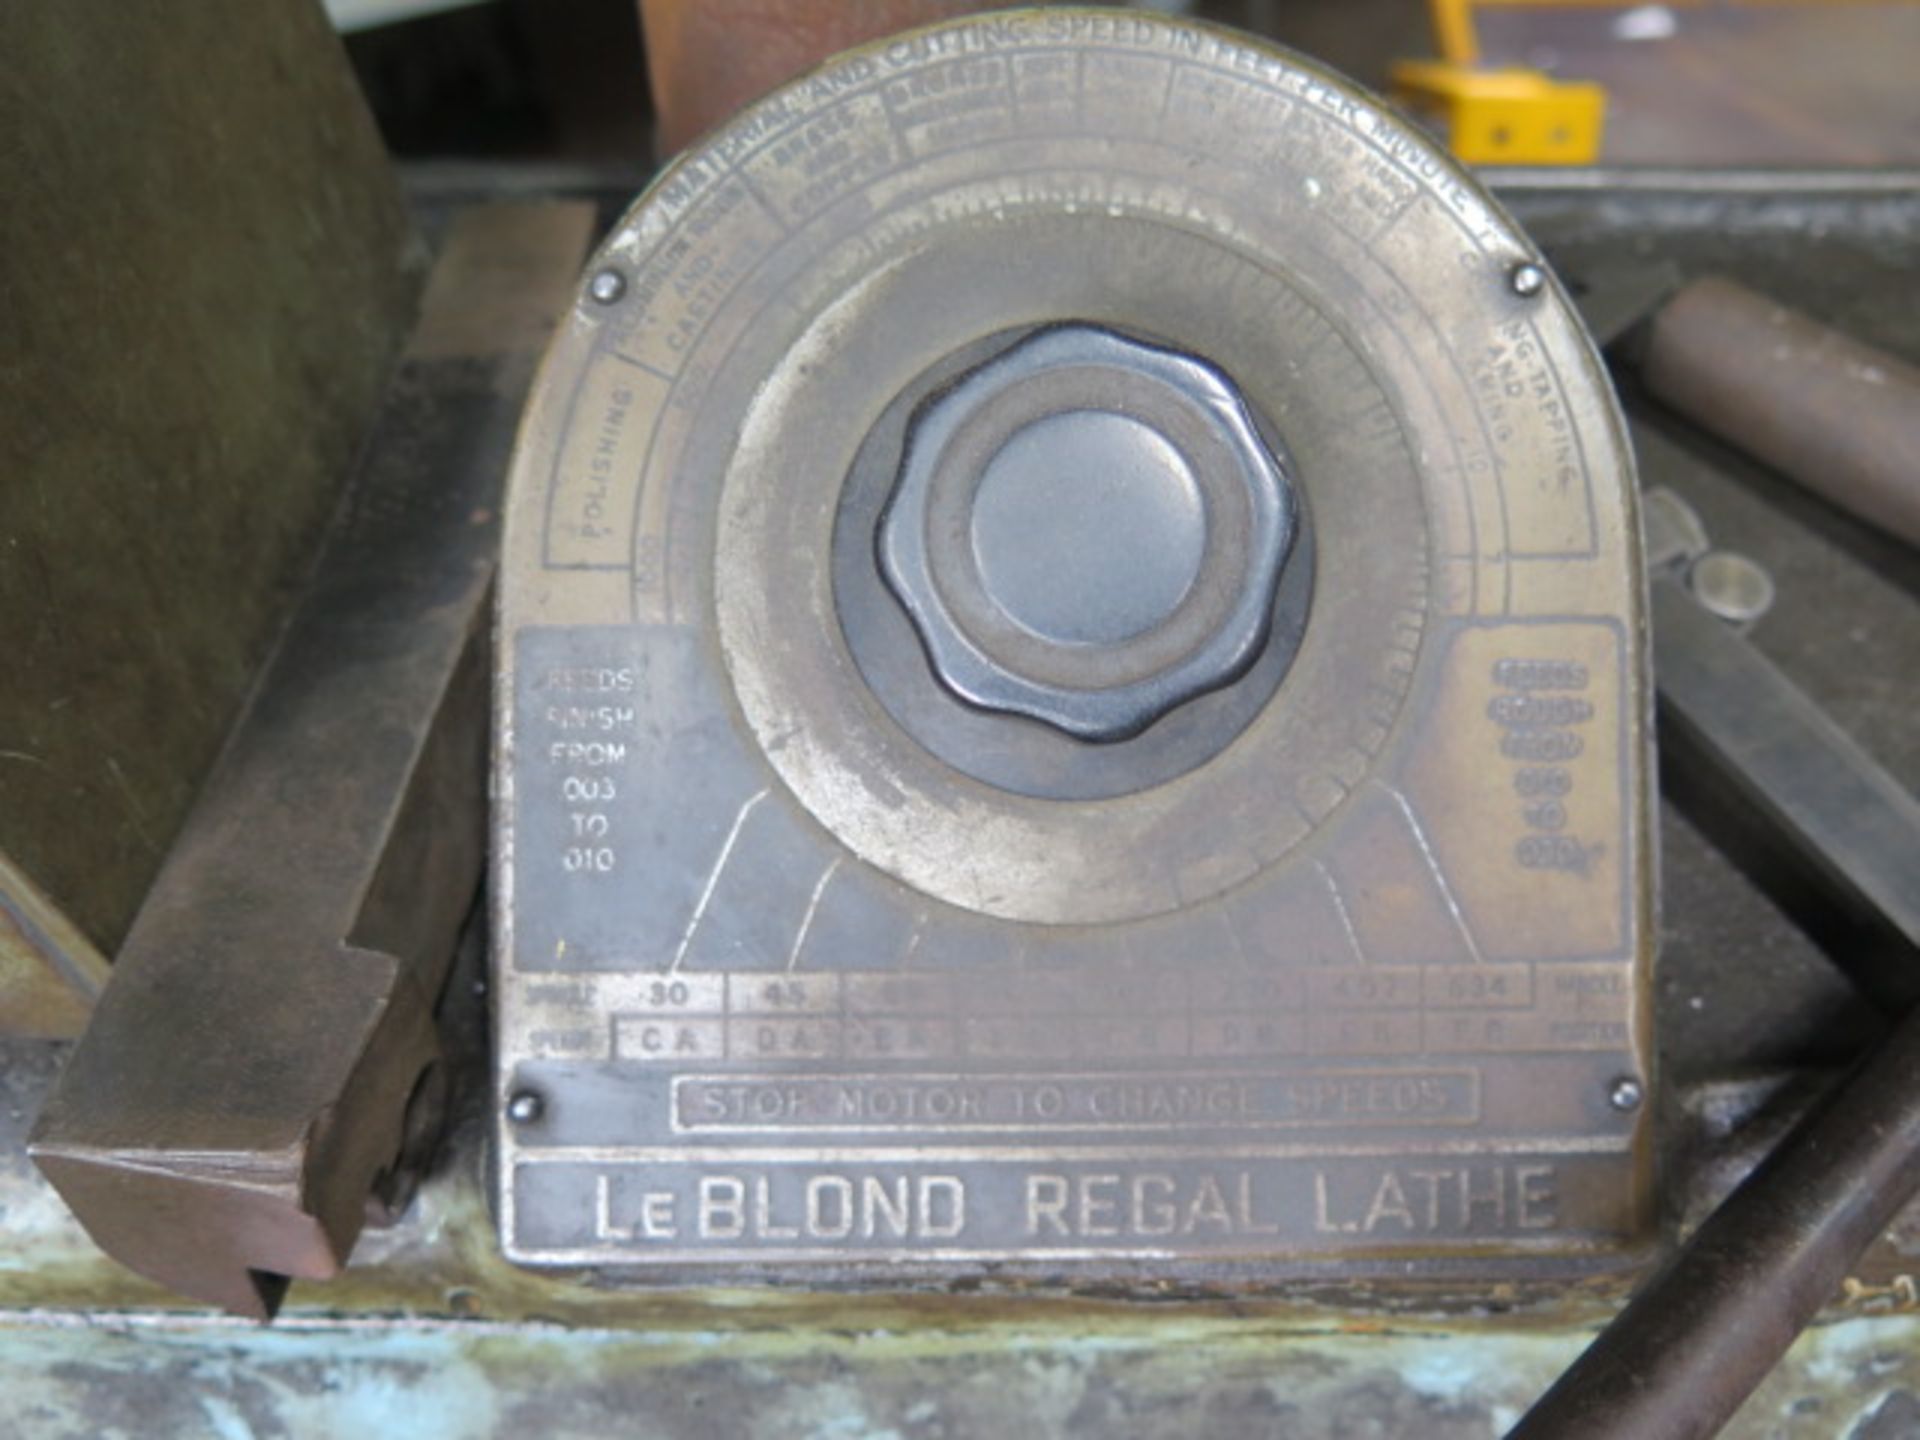 LeBlond 18” x 54” Lathe w/ 10-634 RPM, Inch Threading, Indexing Tool Post, 10” 3-Jaw, SOLD AS IS - Image 7 of 7